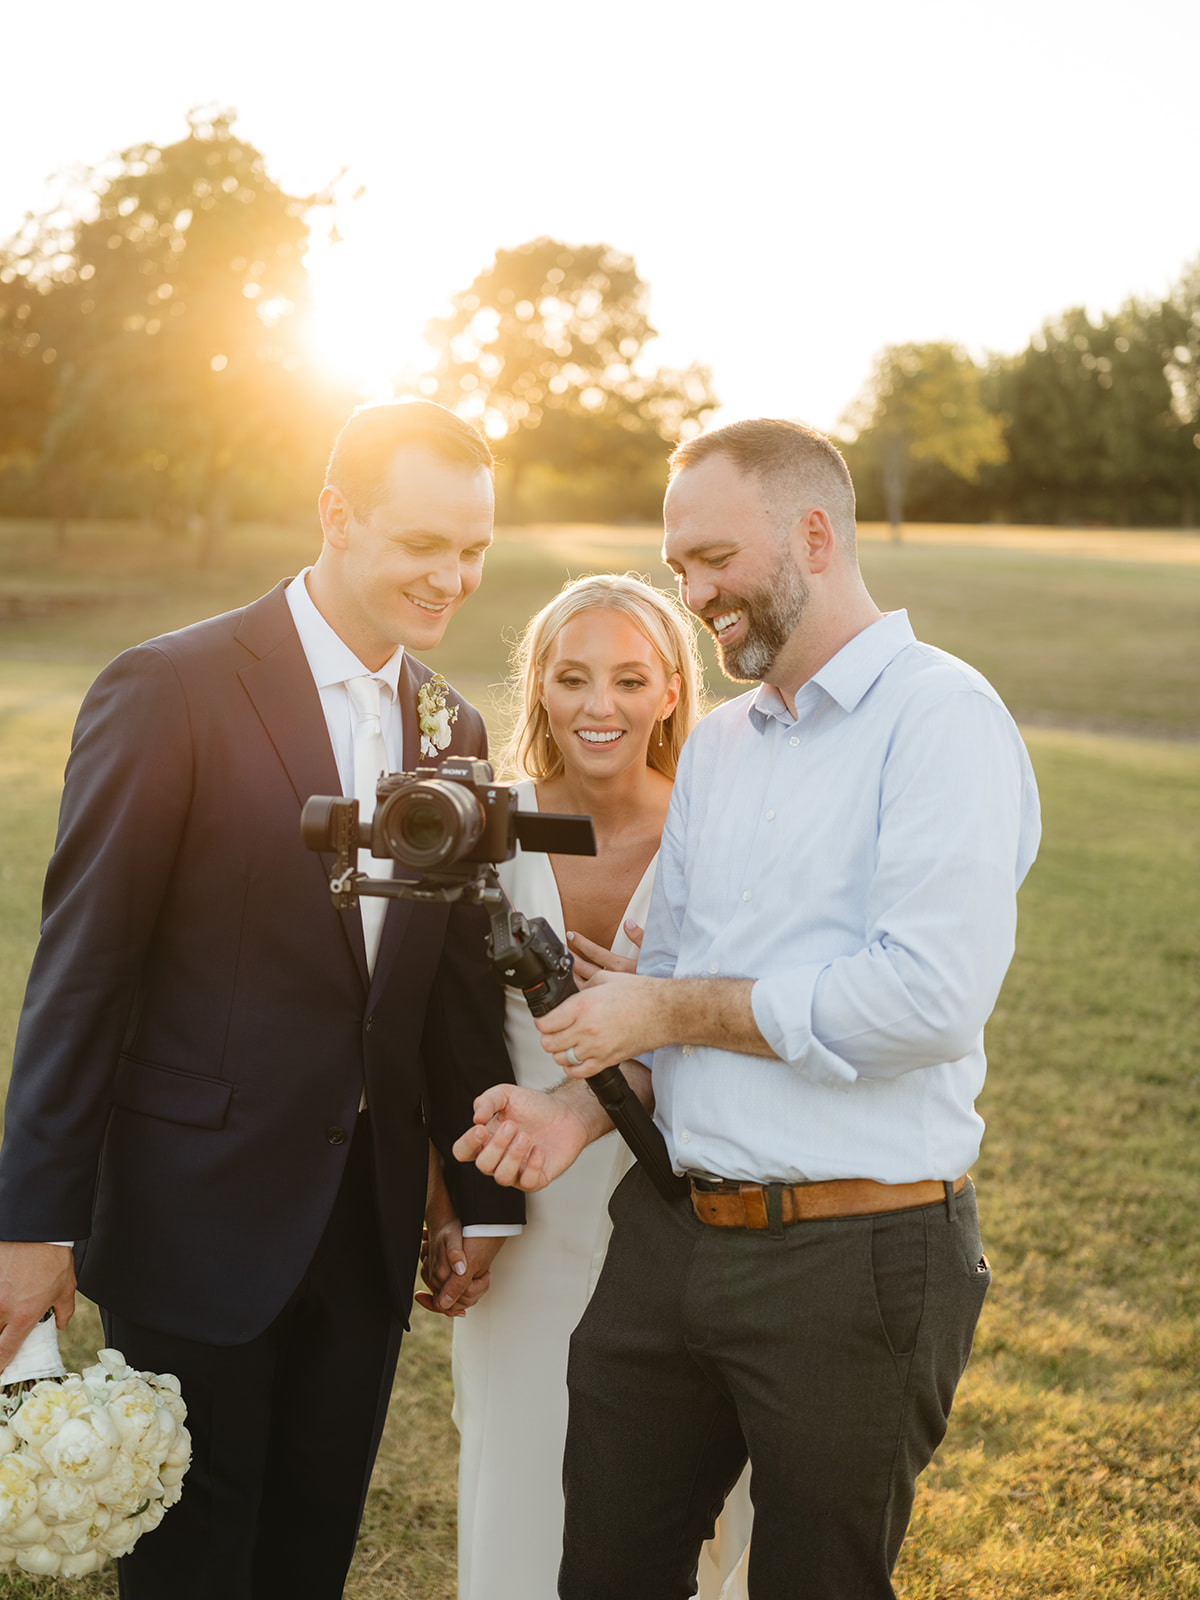 dave and a camera wedding video with bride and groom